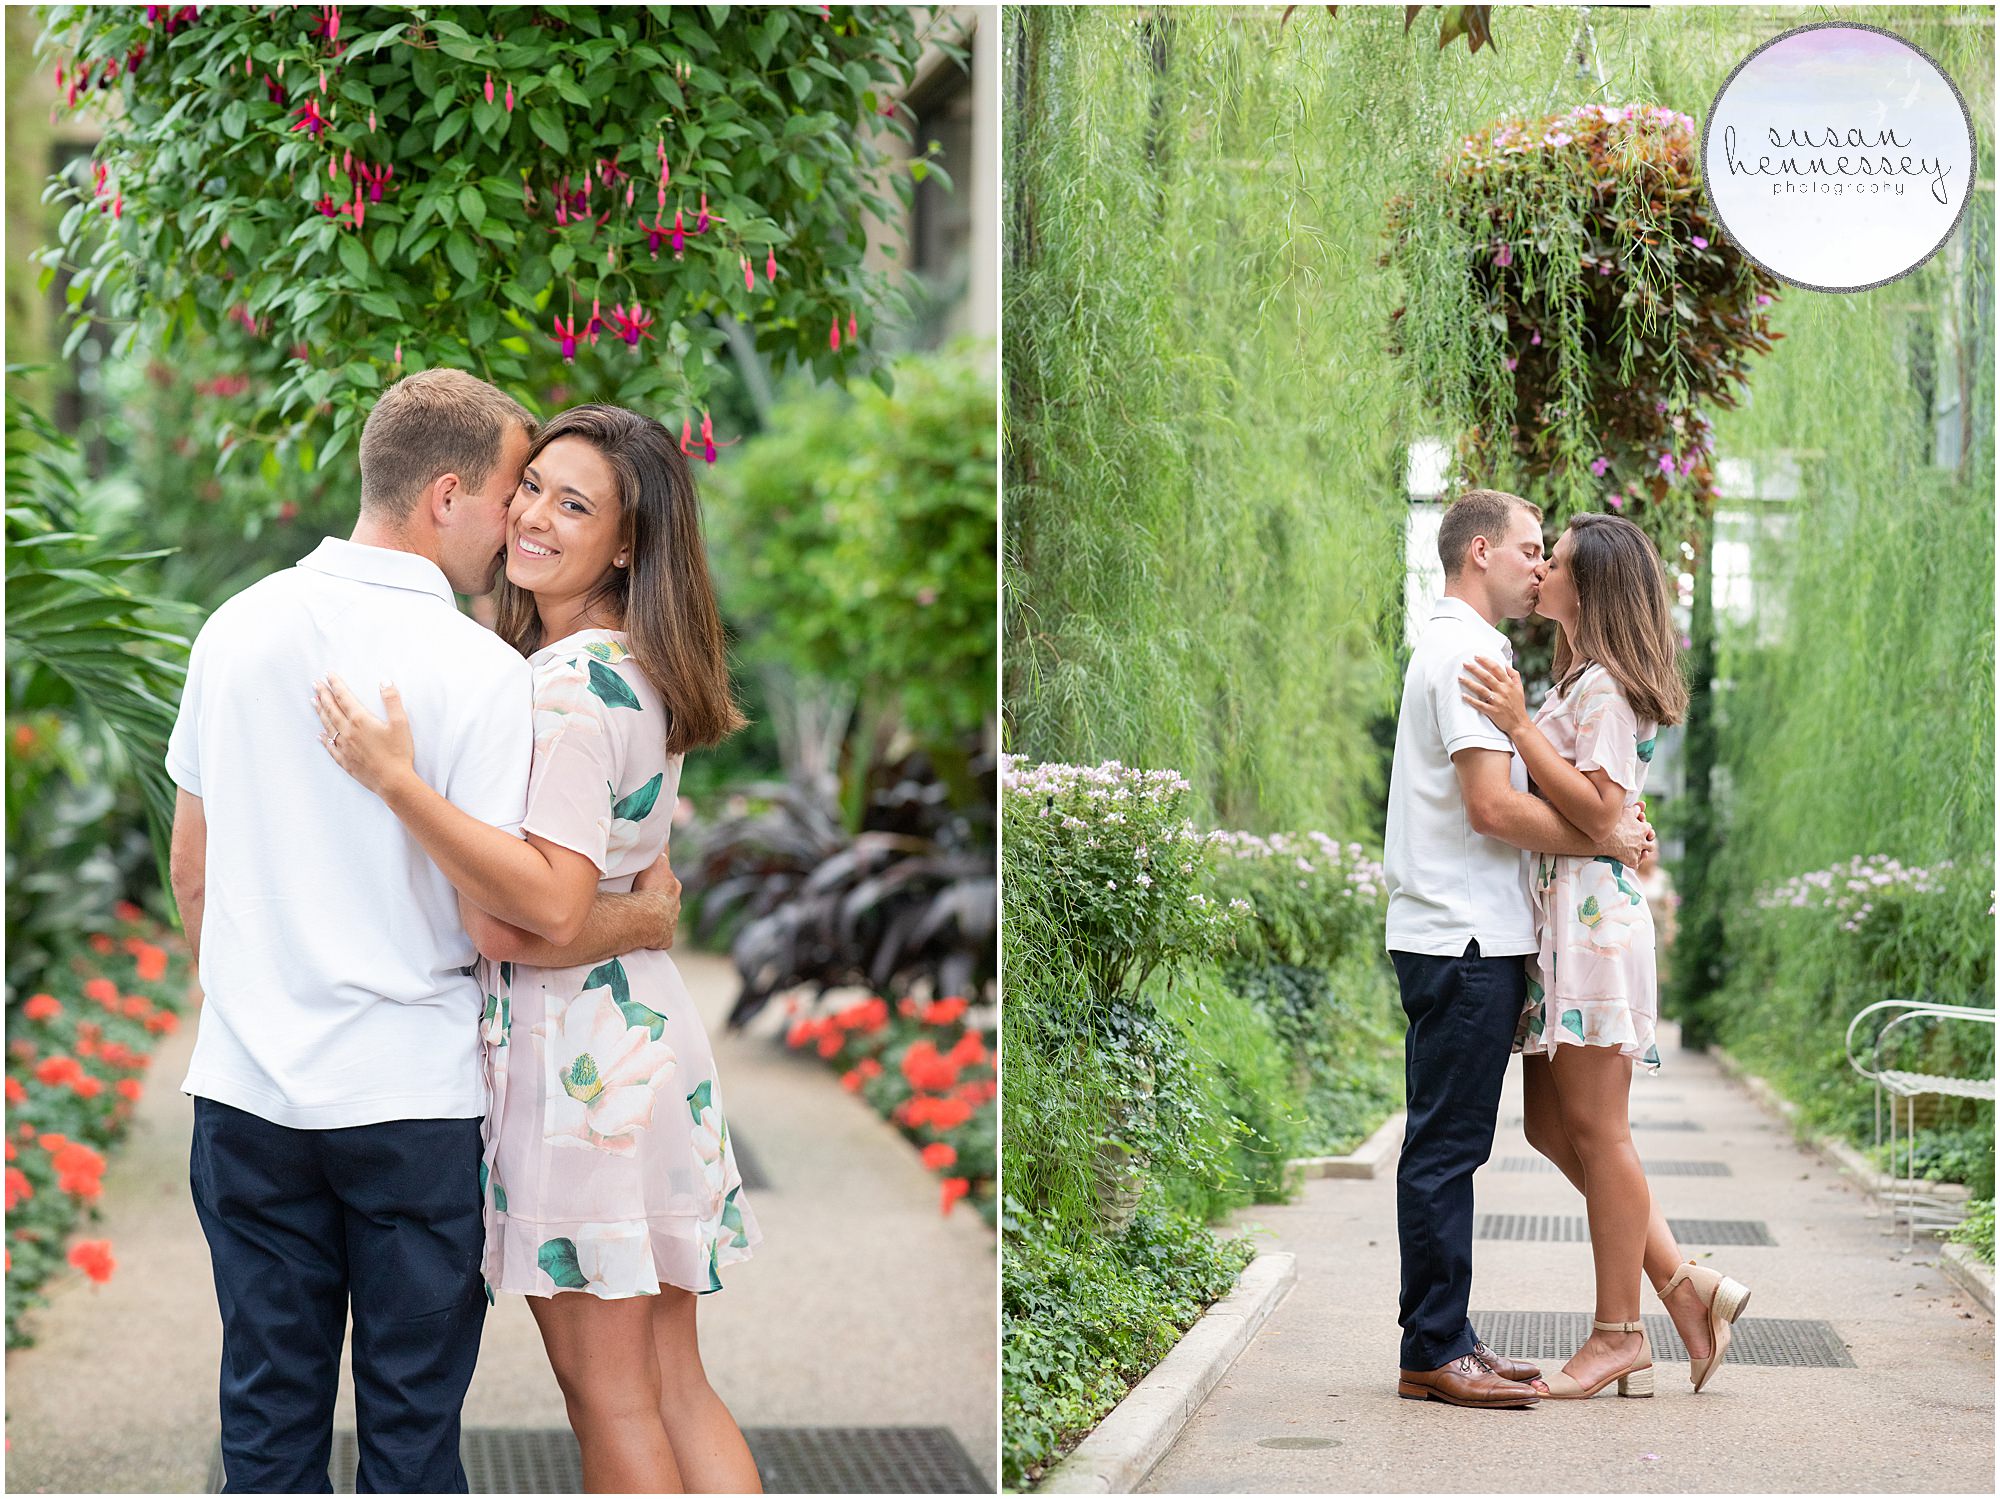 An engagement session with a green color palette